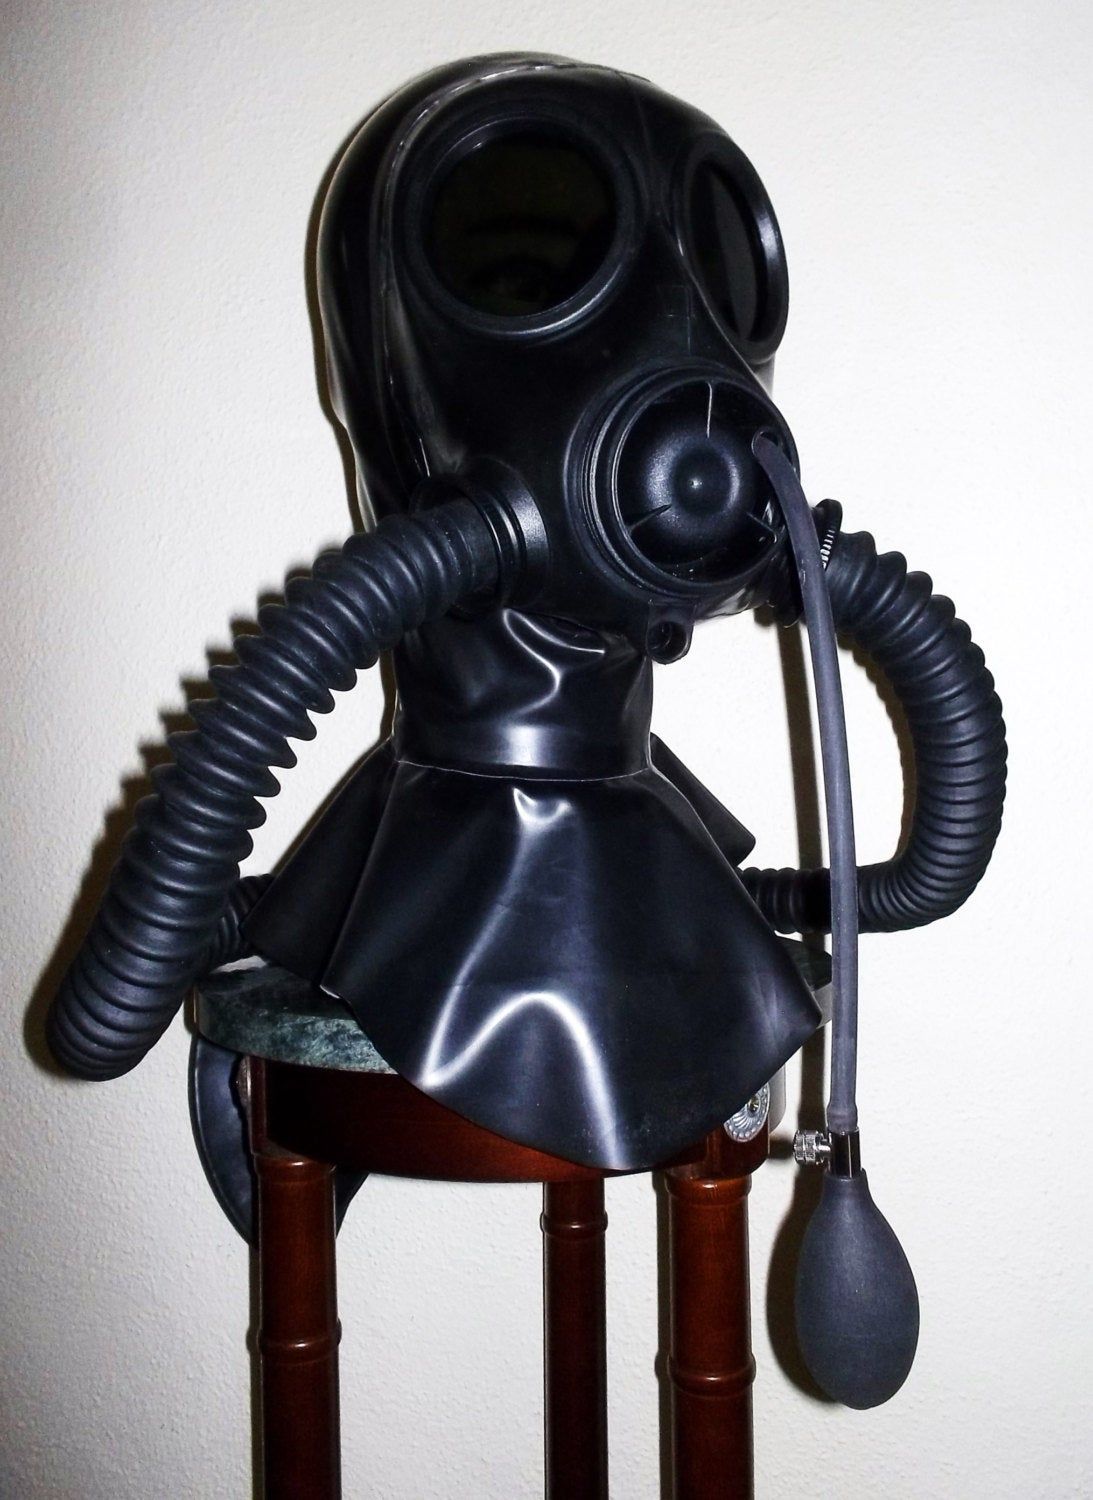 Goalie reccomend Fetish and gas mask